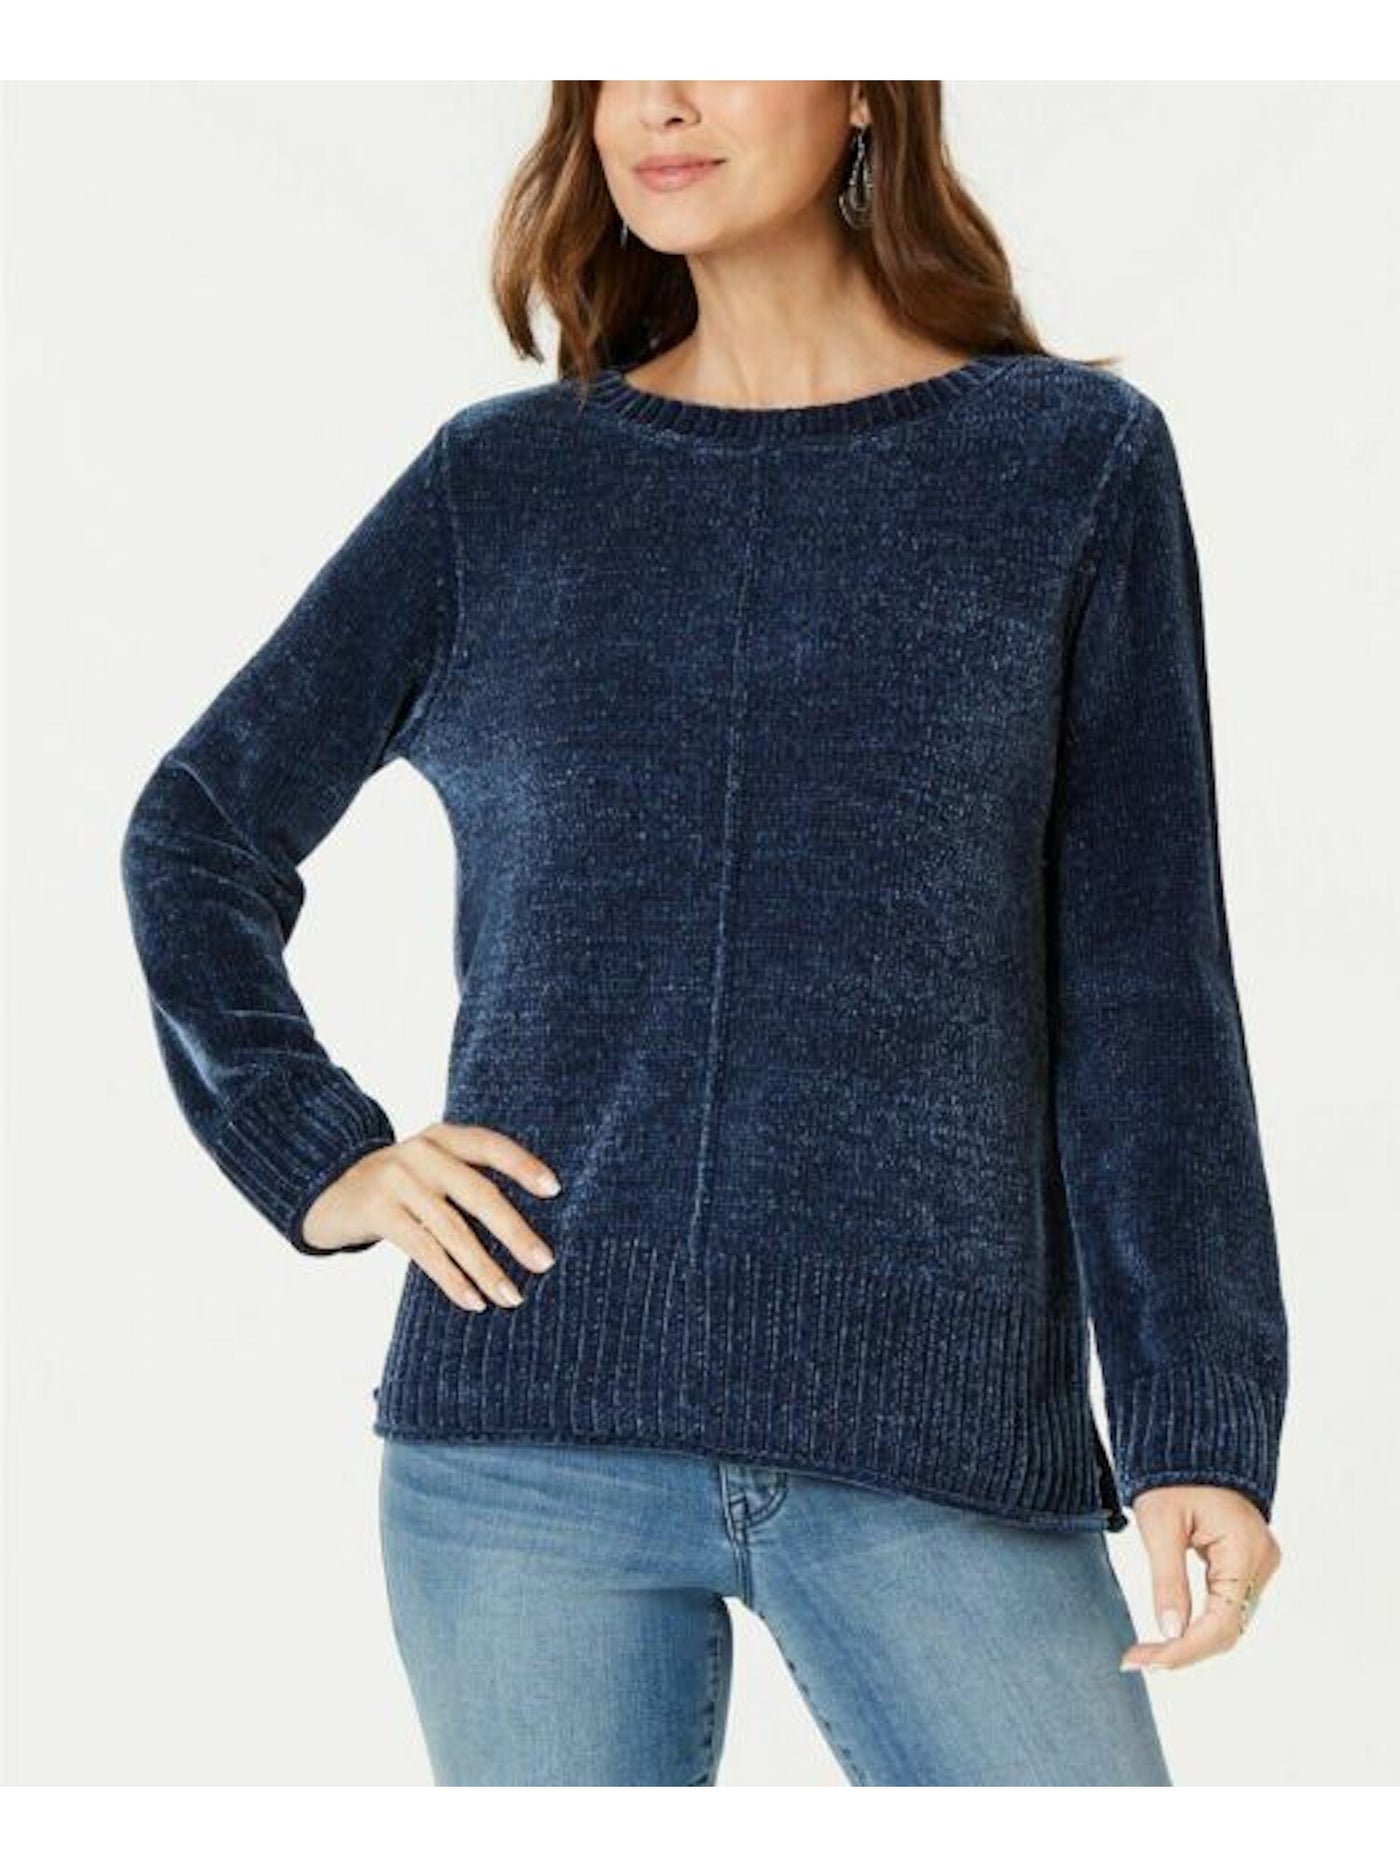 STYLE & COMPANY Womens Navy Heather Long Sleeve Sweater Size: M